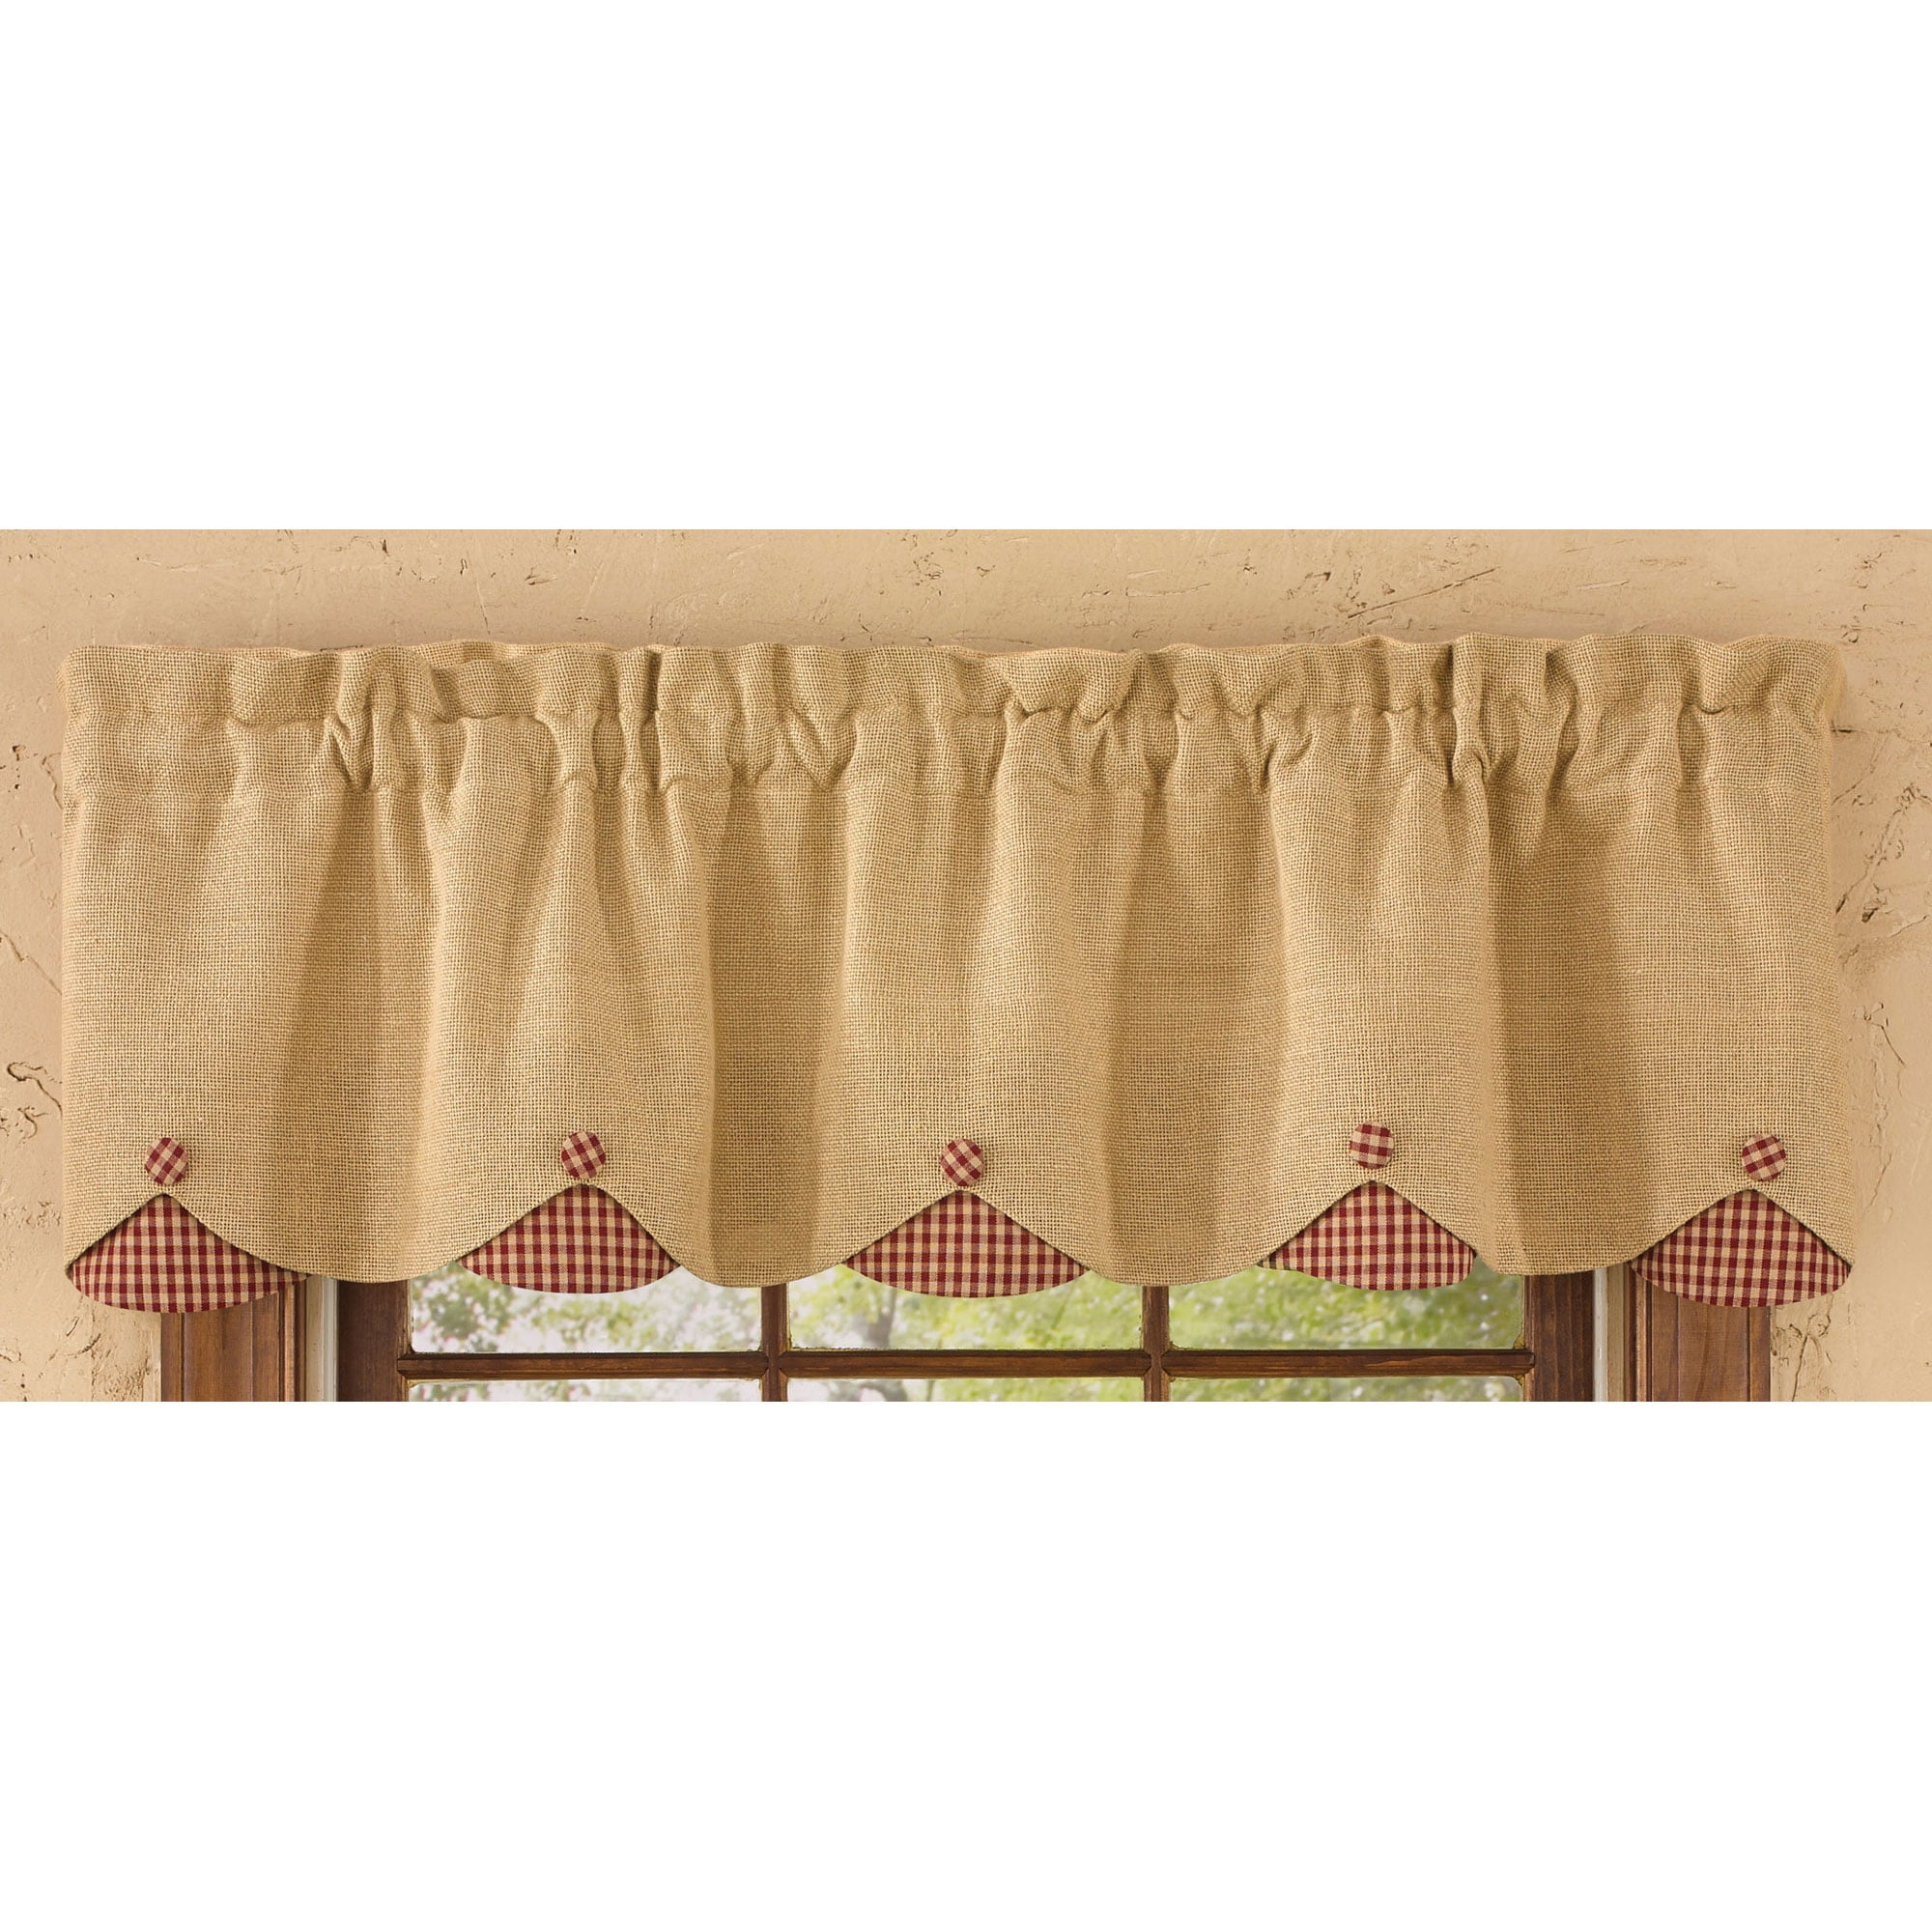 Burlap and Check Scalloped Curtain Valance by Park Designs Black or Wine